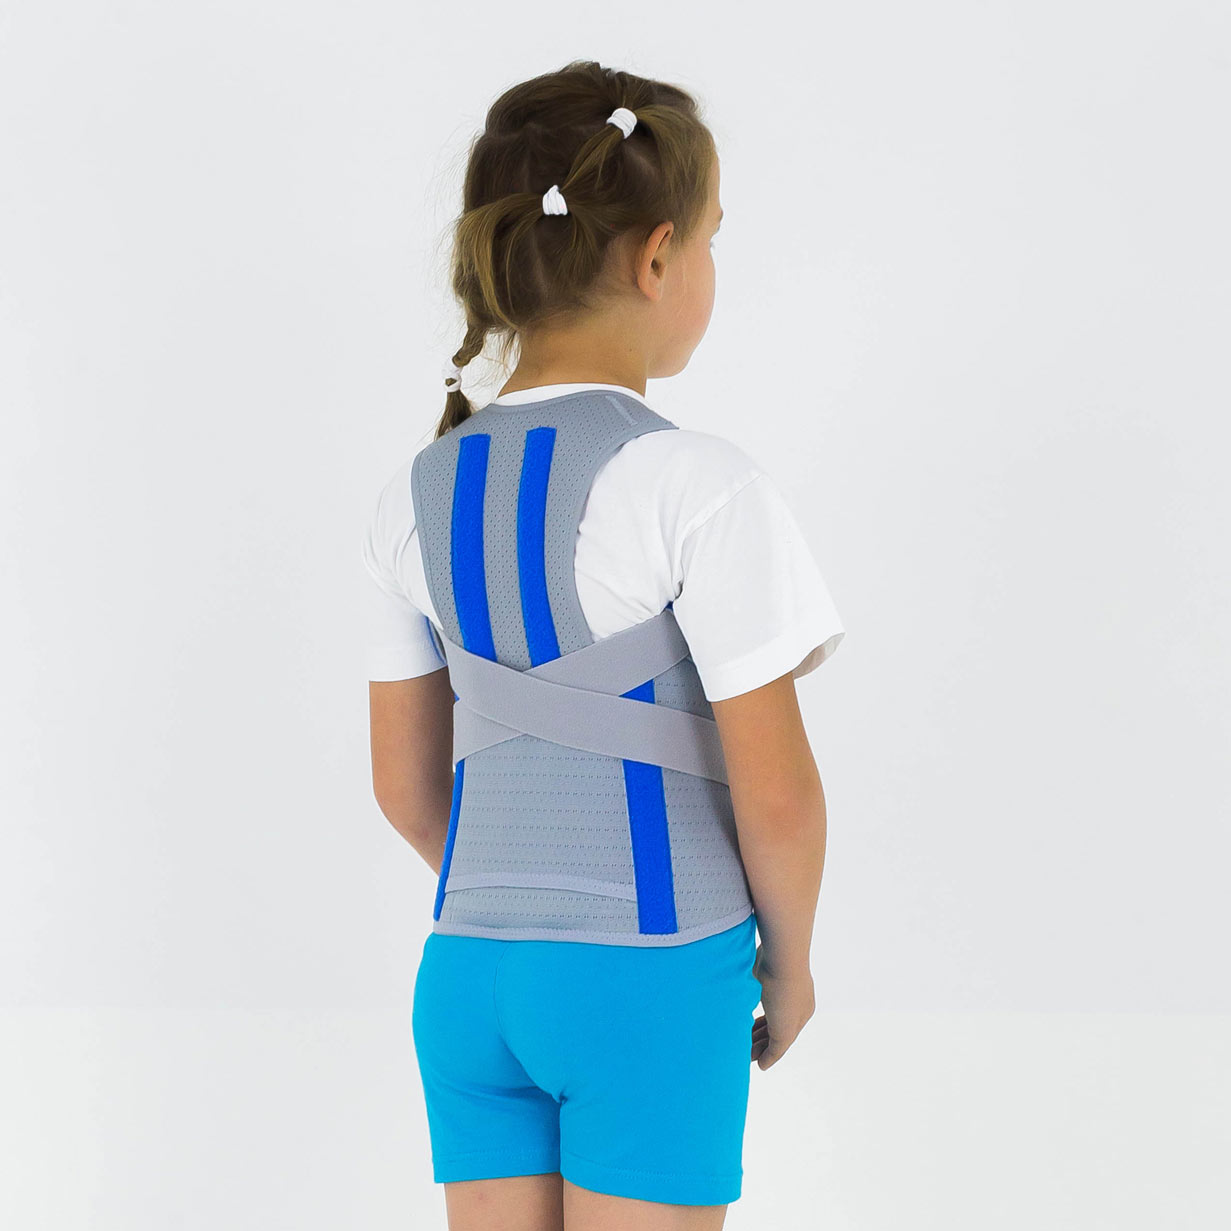 Full Back TLSO Brace for Compression Fracture, Lordosis & Posture